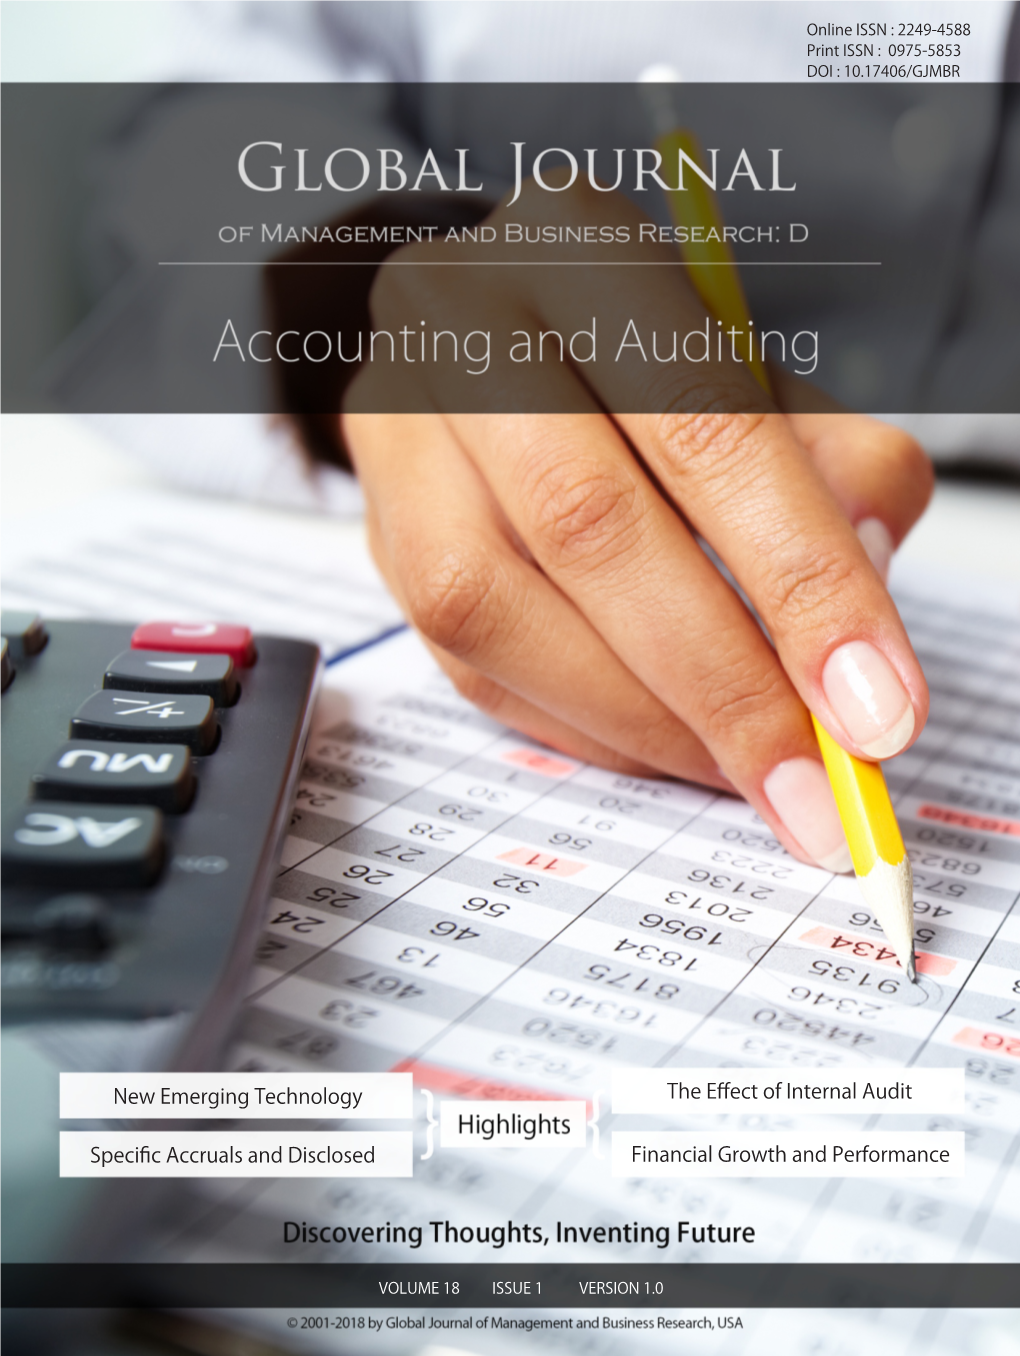 Global Journal of Management and Business Research: D Accounting and Auditing